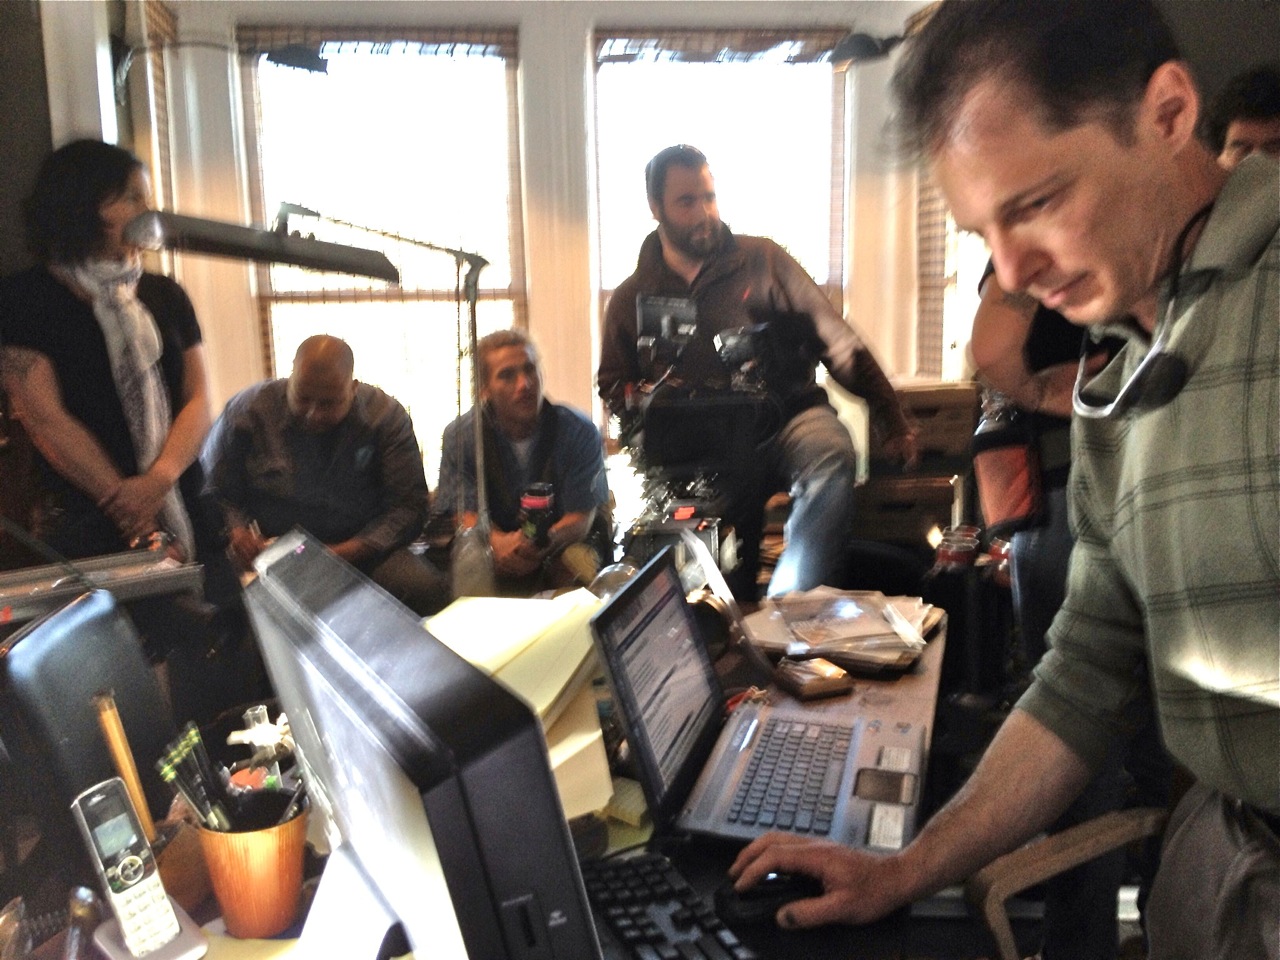 Prepping playback software on the set of The Unknown (Crackle.com's webisode series).